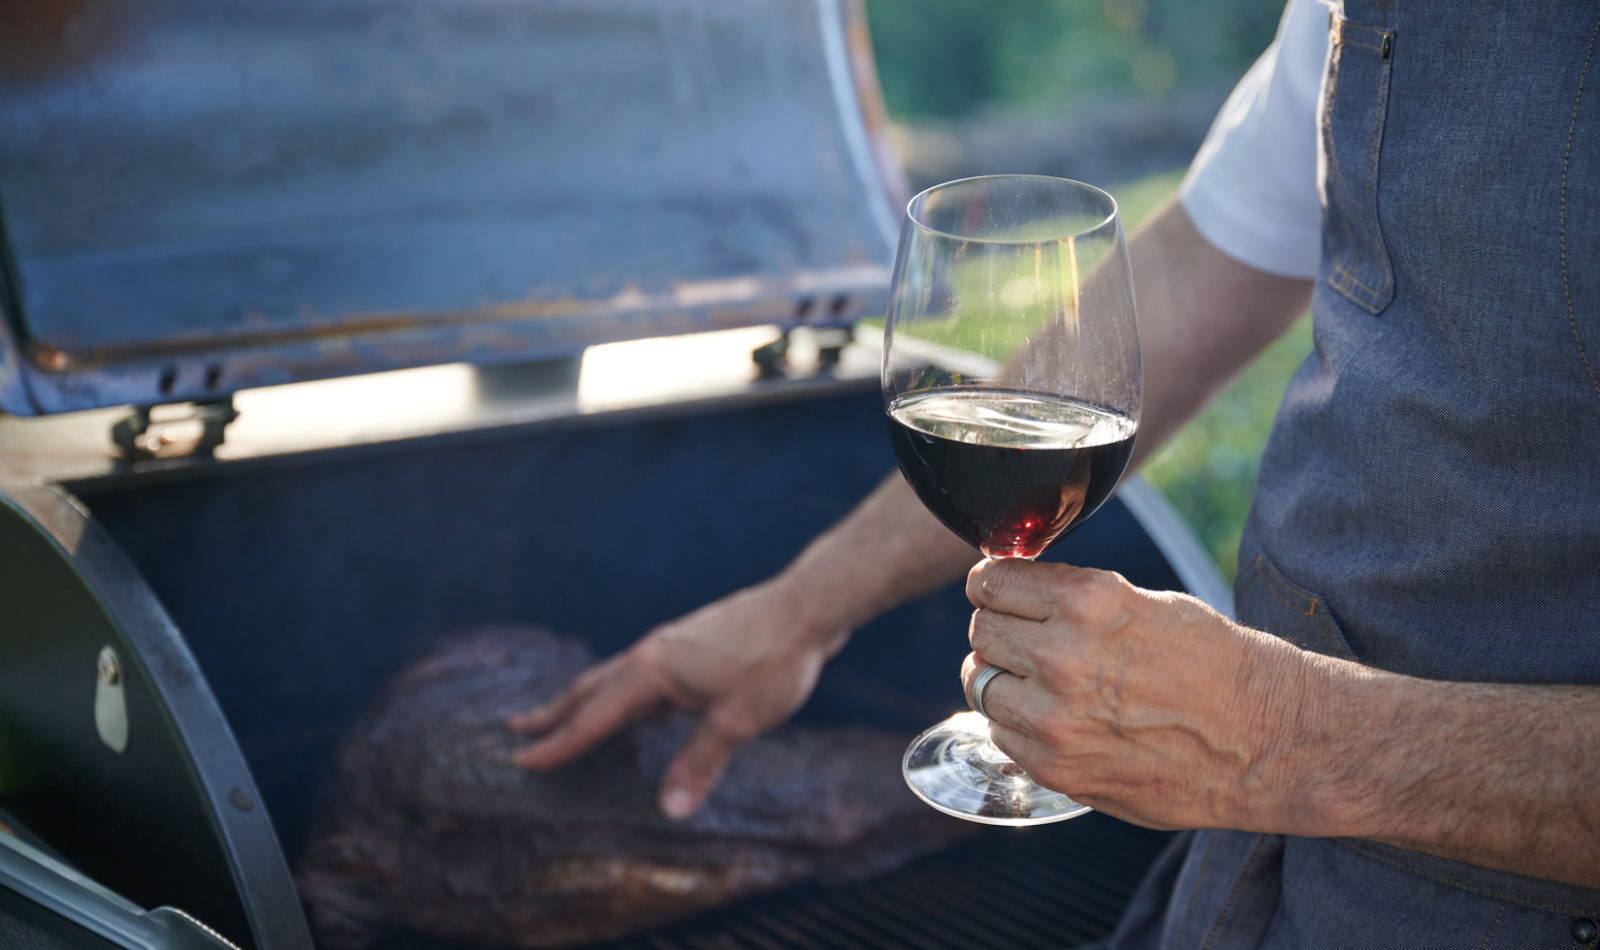 Hand touching meat on a grill with a glass of red wine in the other hand